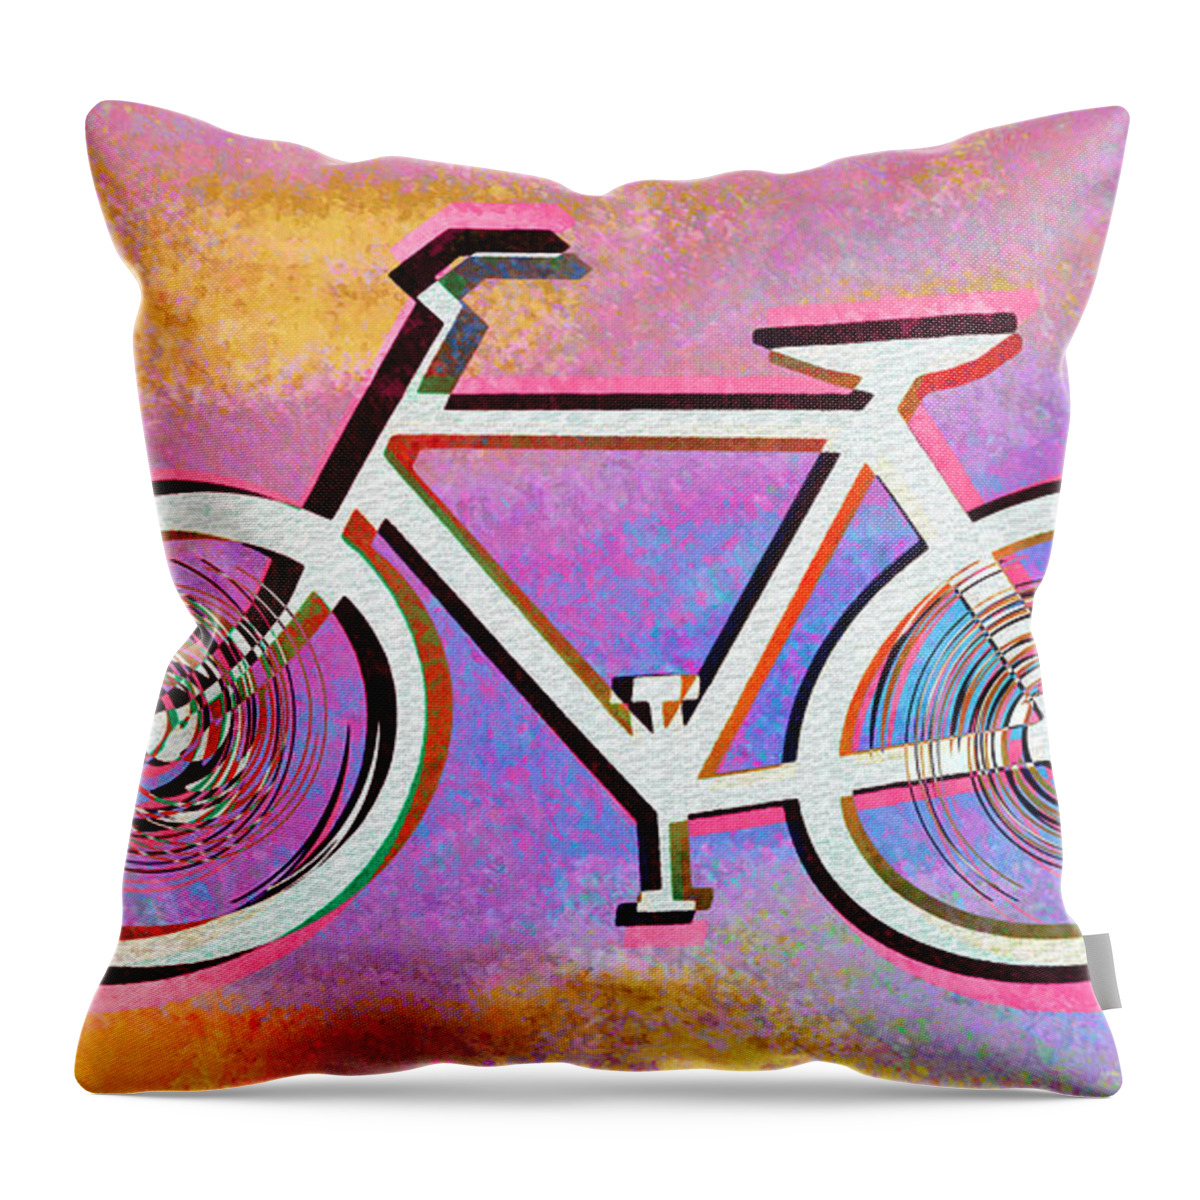 The Psychedelic Bicycle Throw Pillow featuring the digital art The Psychedelic Bicycle by Bill Cannon